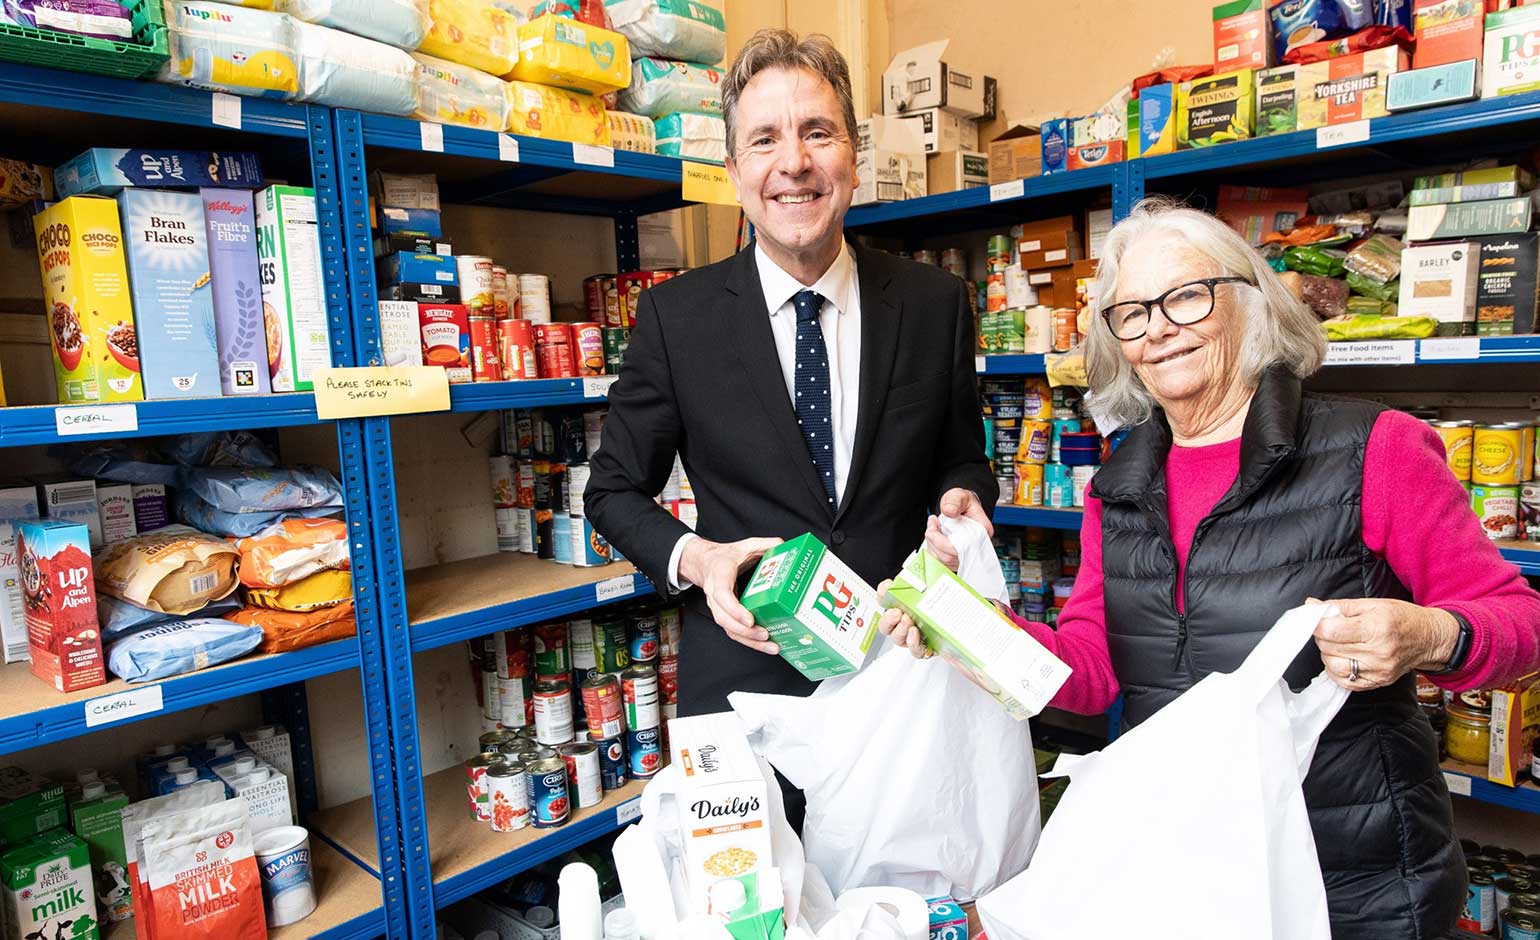 Increase in number of food parcels being distributed is “scandalous”